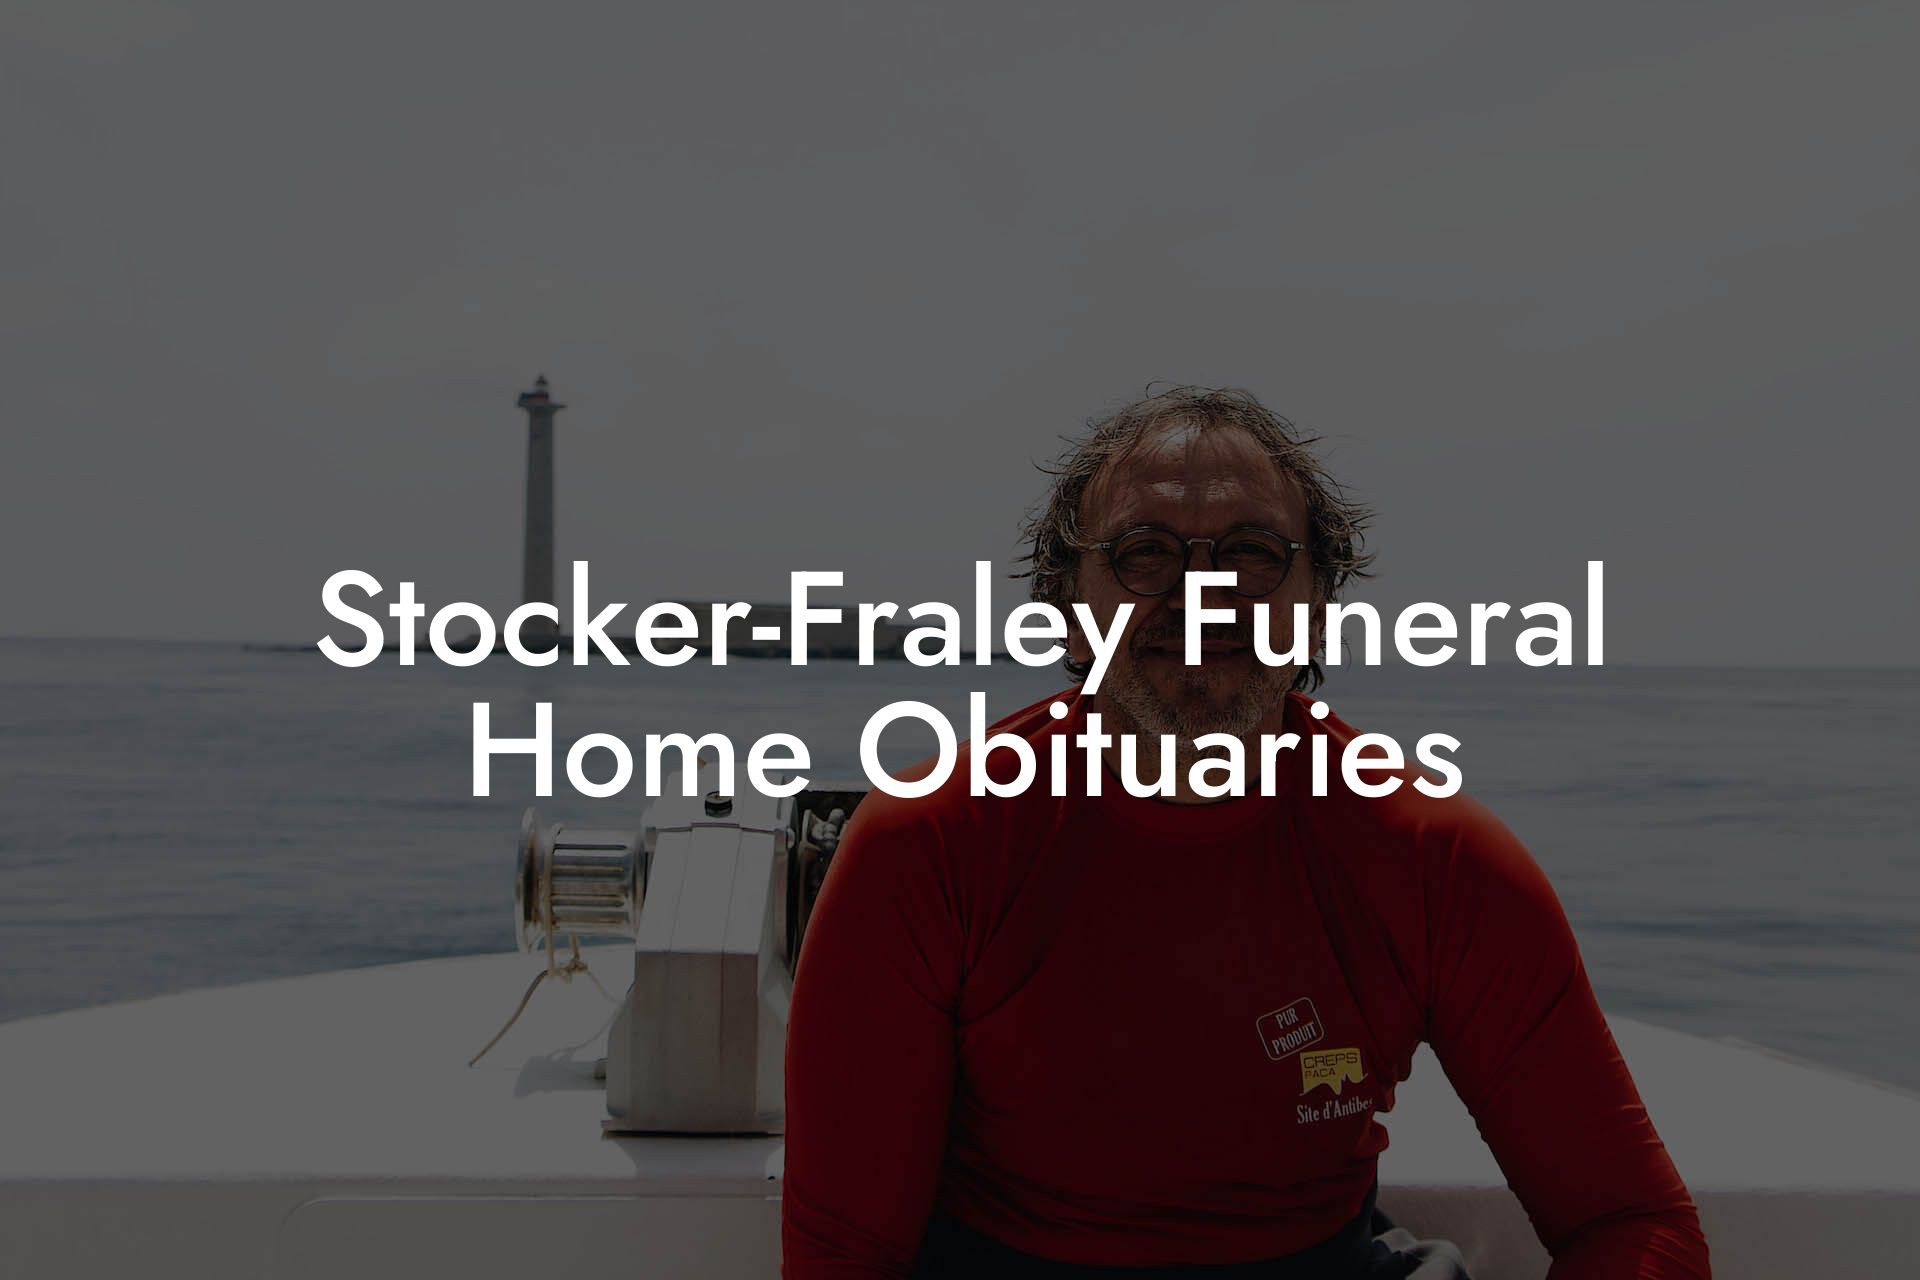 Stocker-Fraley Funeral Home Obituaries